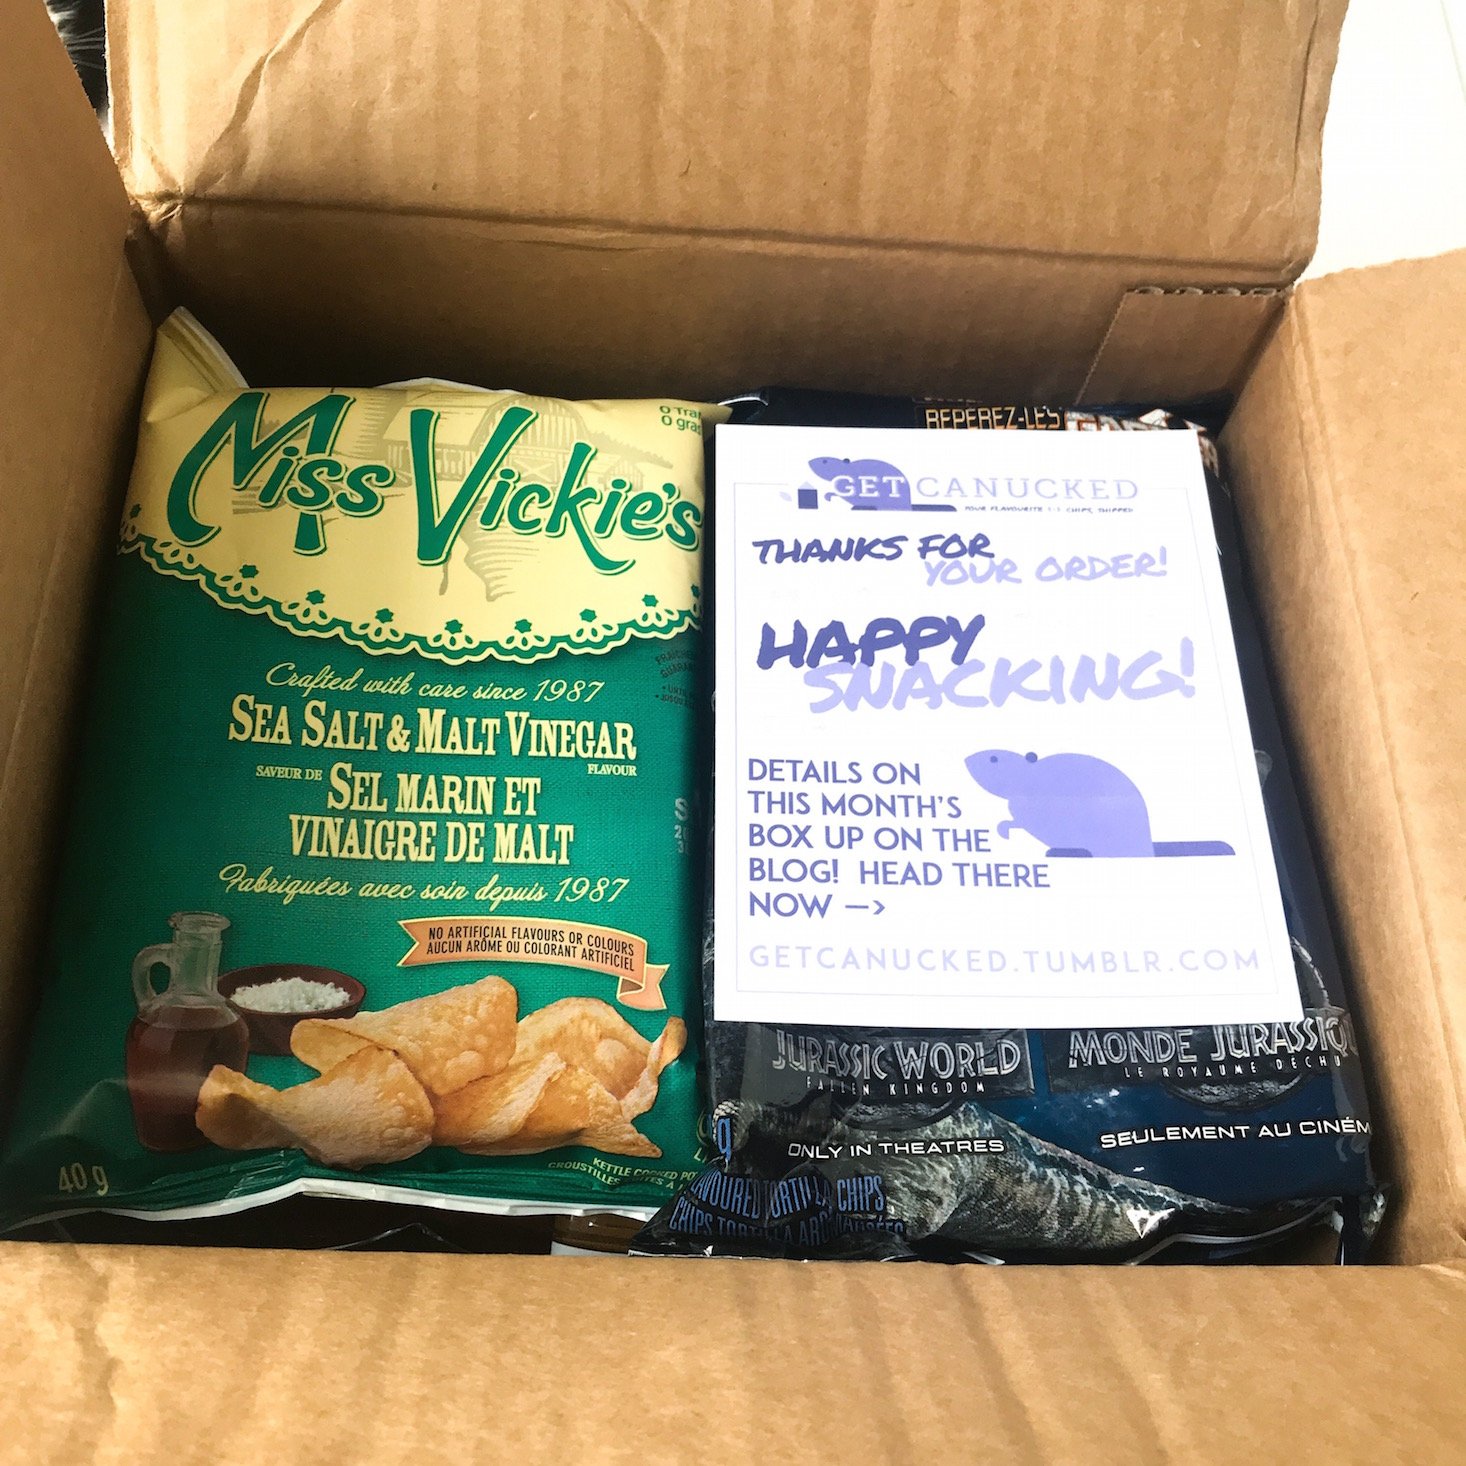 Get Canucked Snack Box Review + Coupon – July 2018